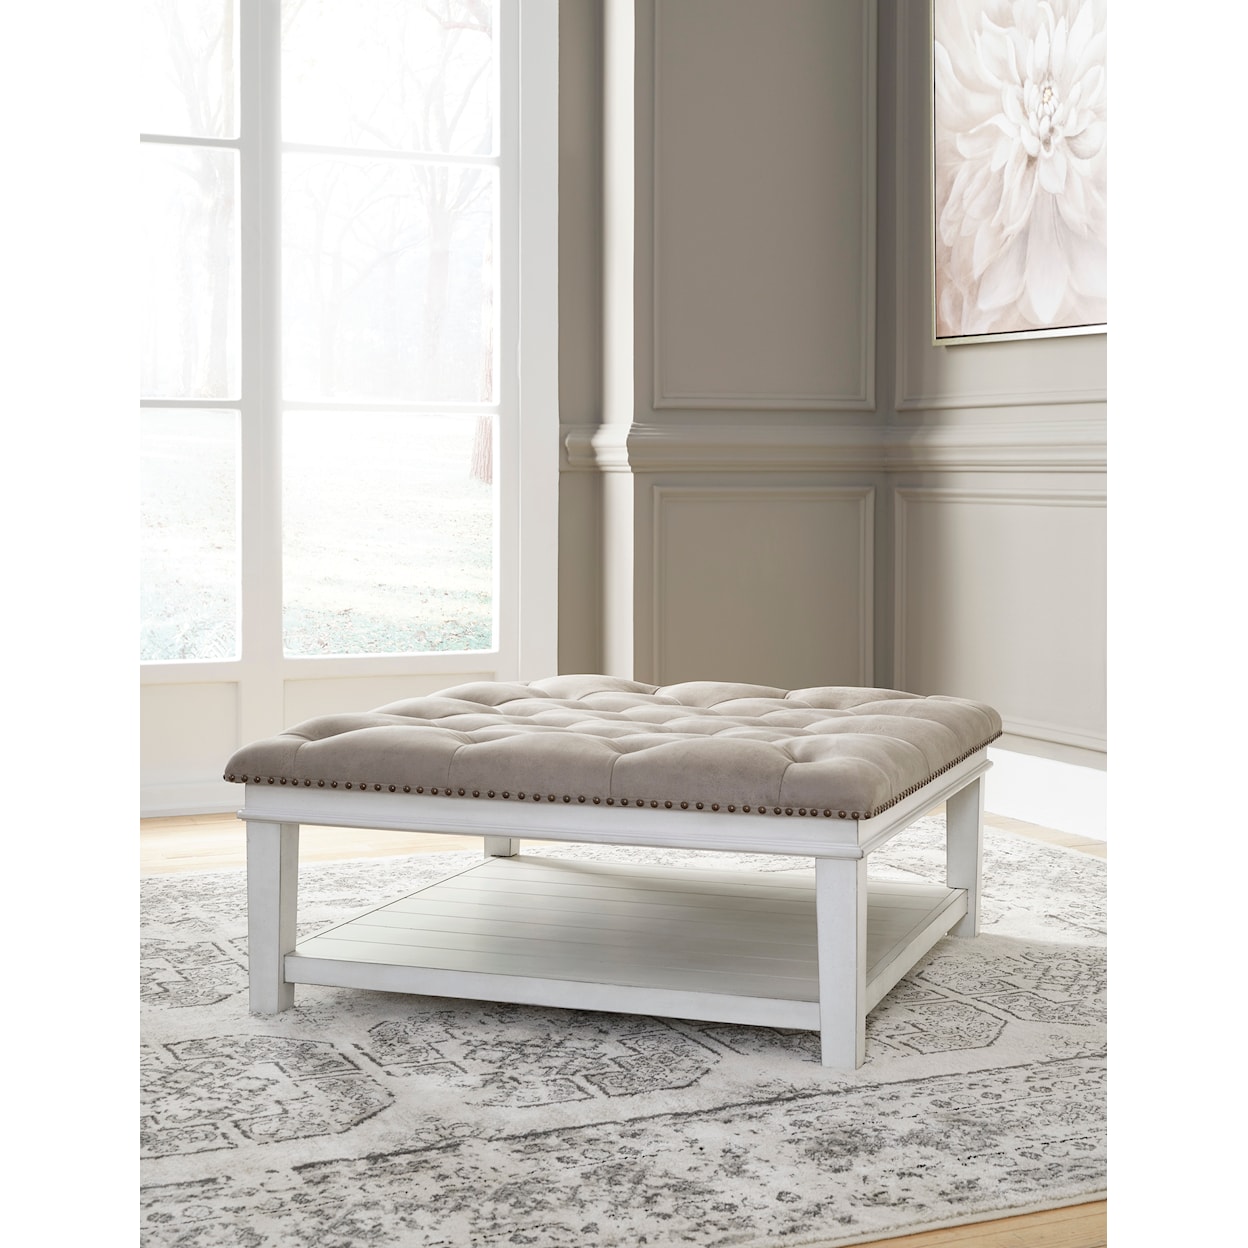 Signature Design Kanwyn Upholstered Ottoman Coffee Table